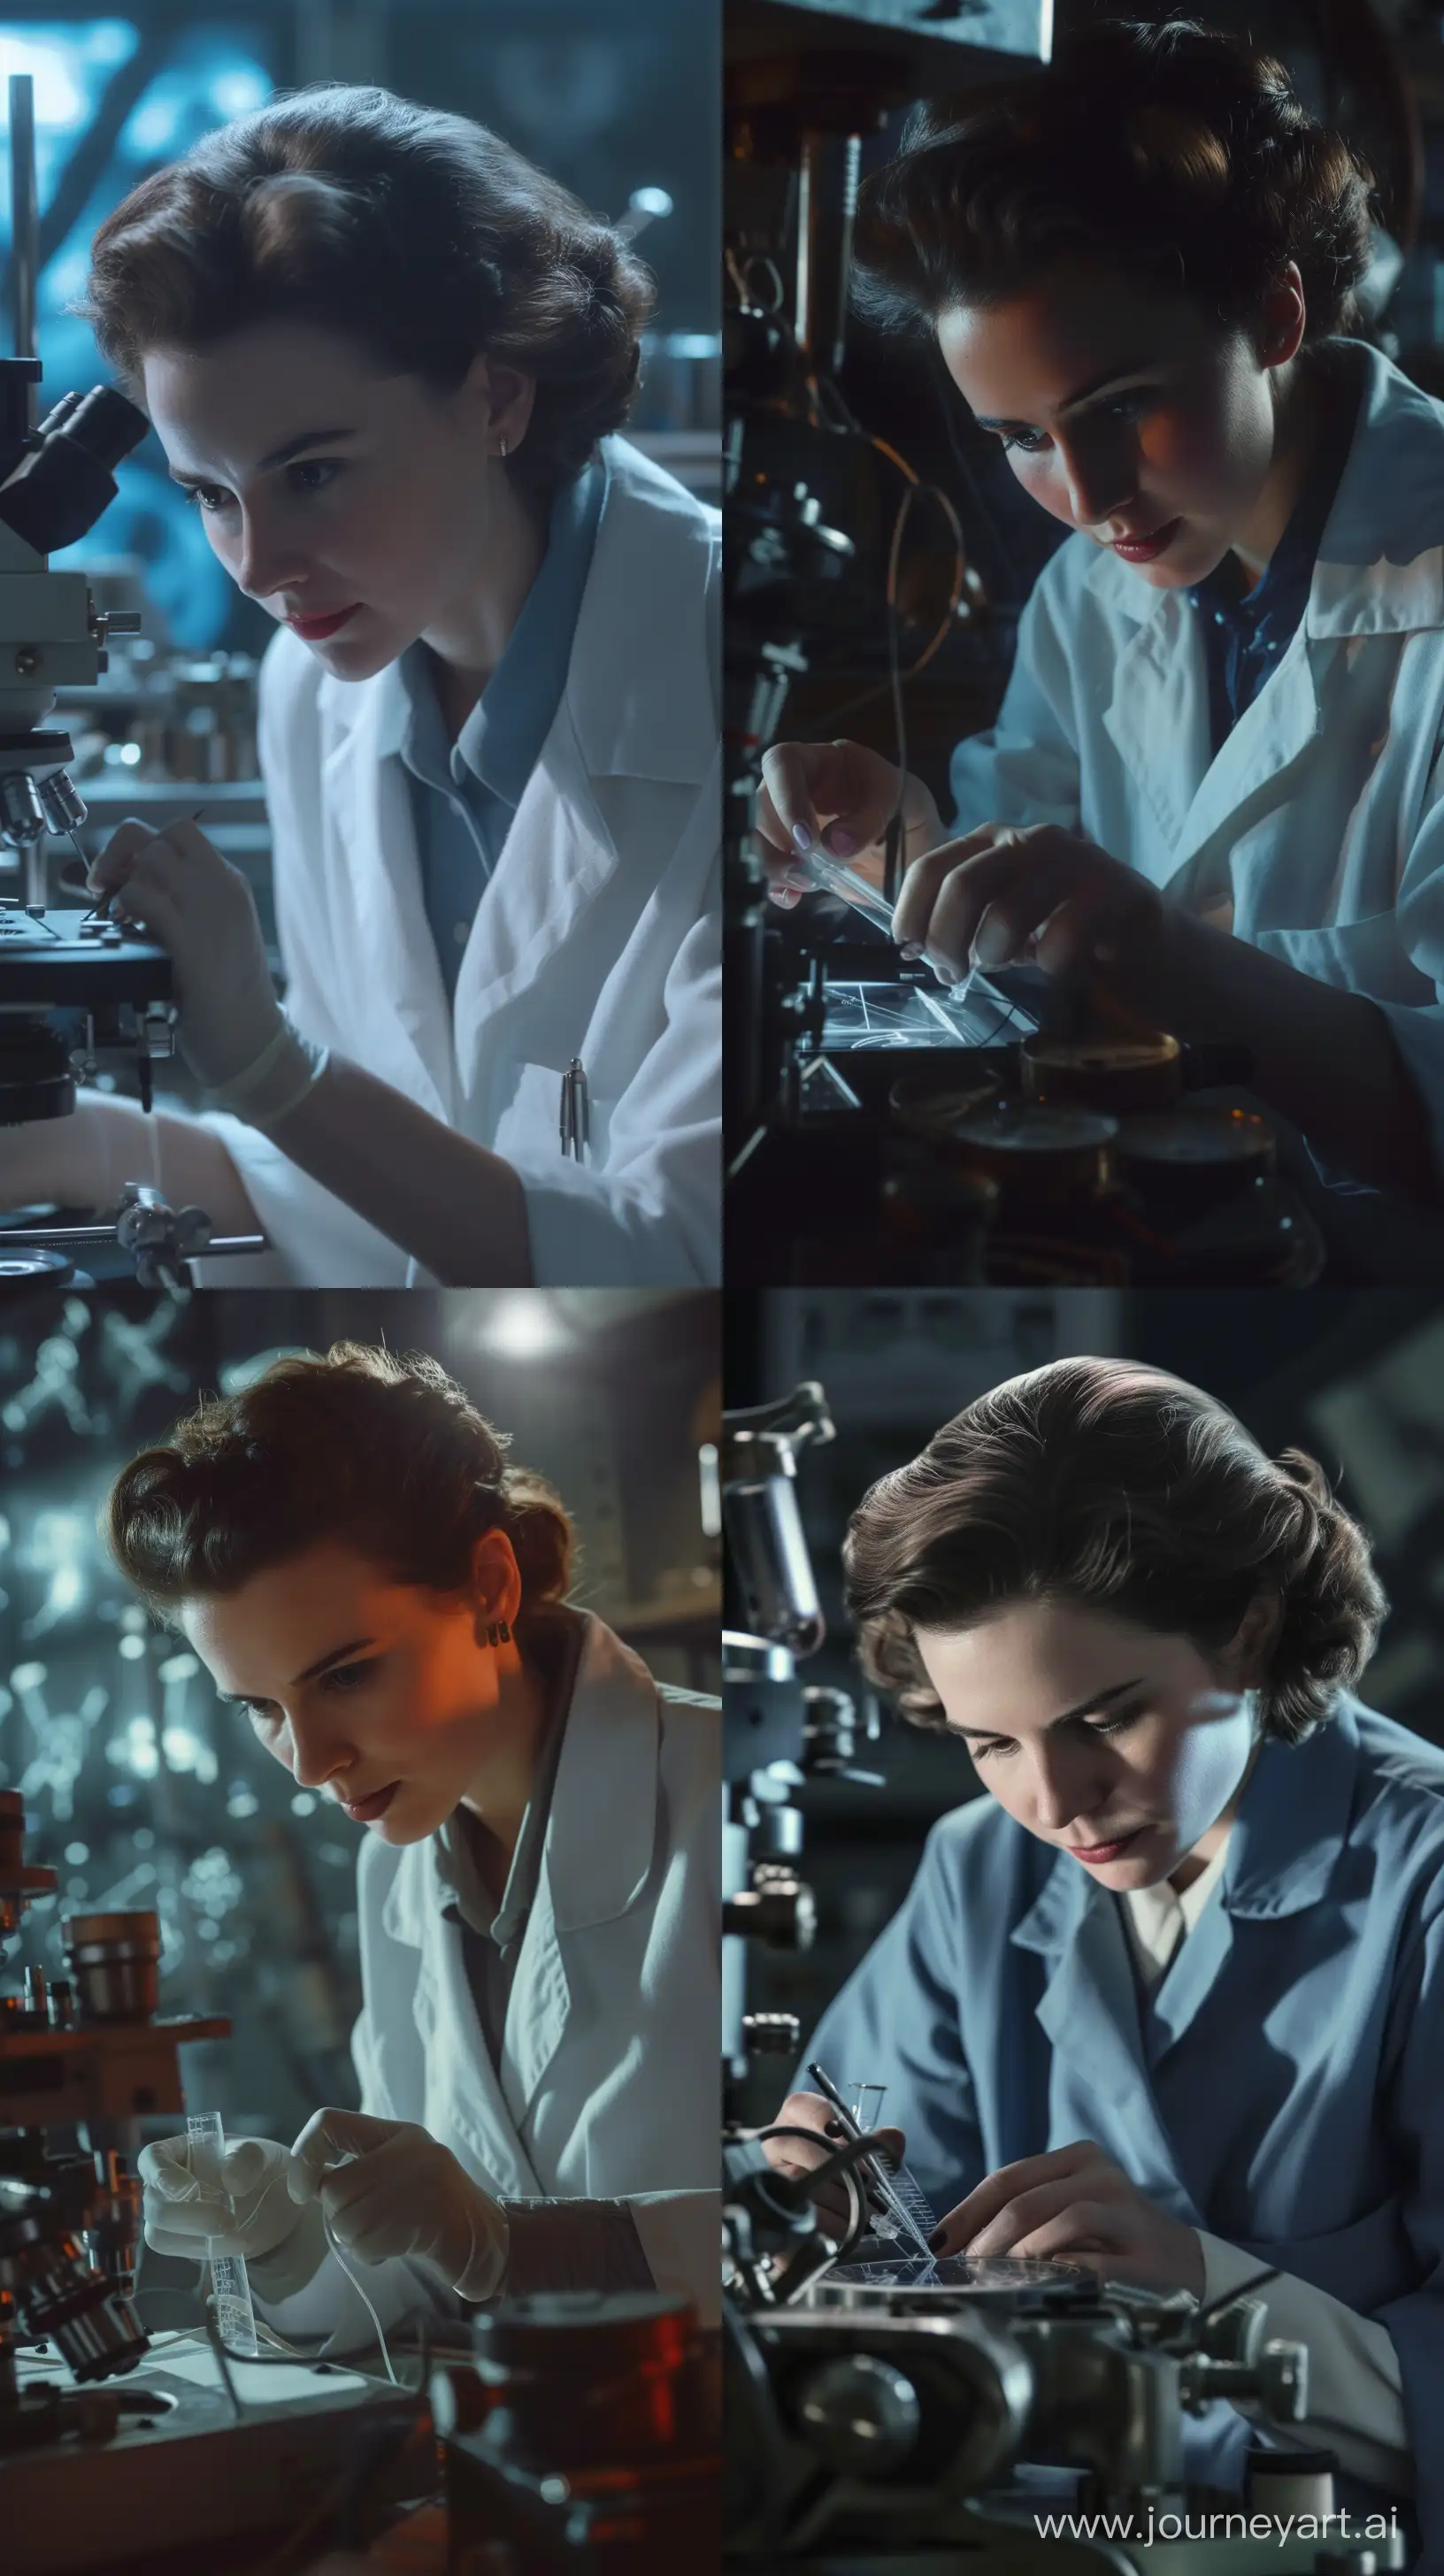 Scientist-Rosalind-Franklin-Analyzing-XRay-Diffraction-Images-in-HighTech-Lab-Setting